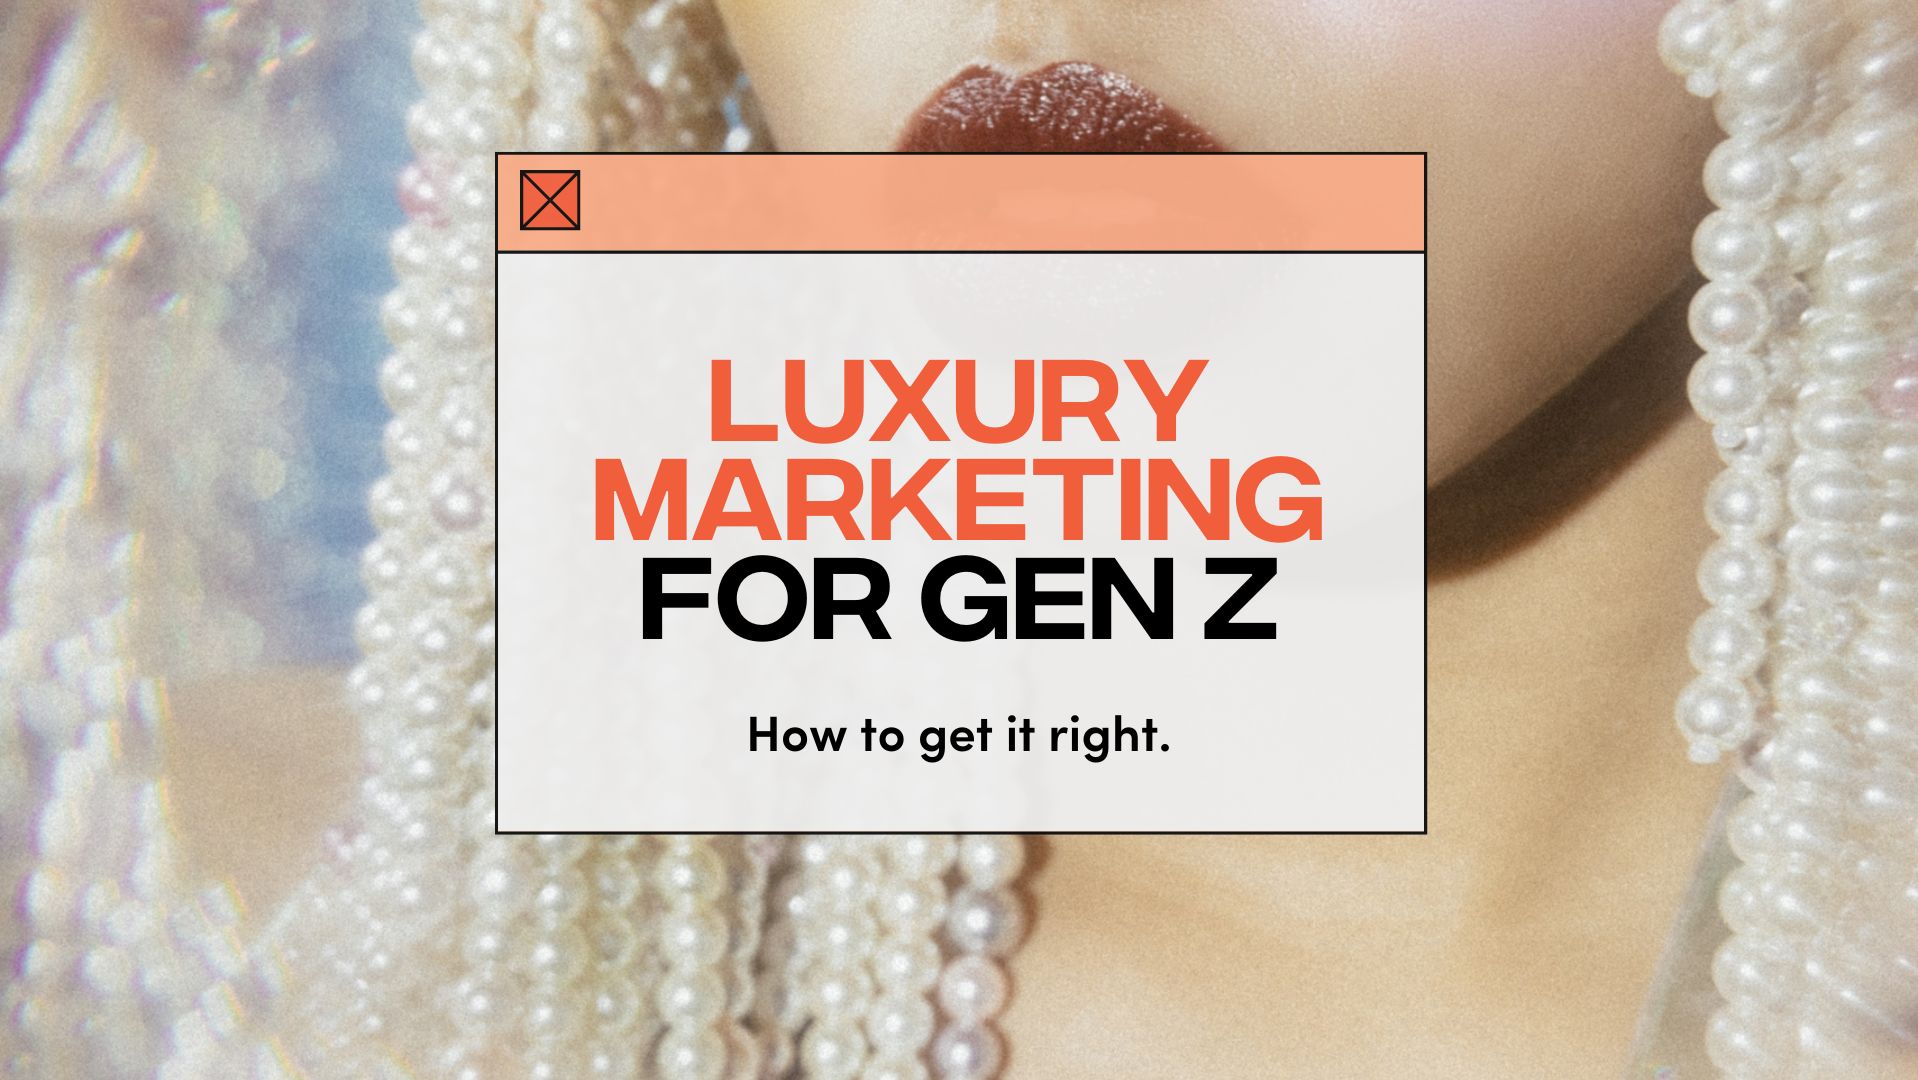 Mounting reports confirm Gen Z favours fake luxury fashion - Thred Website